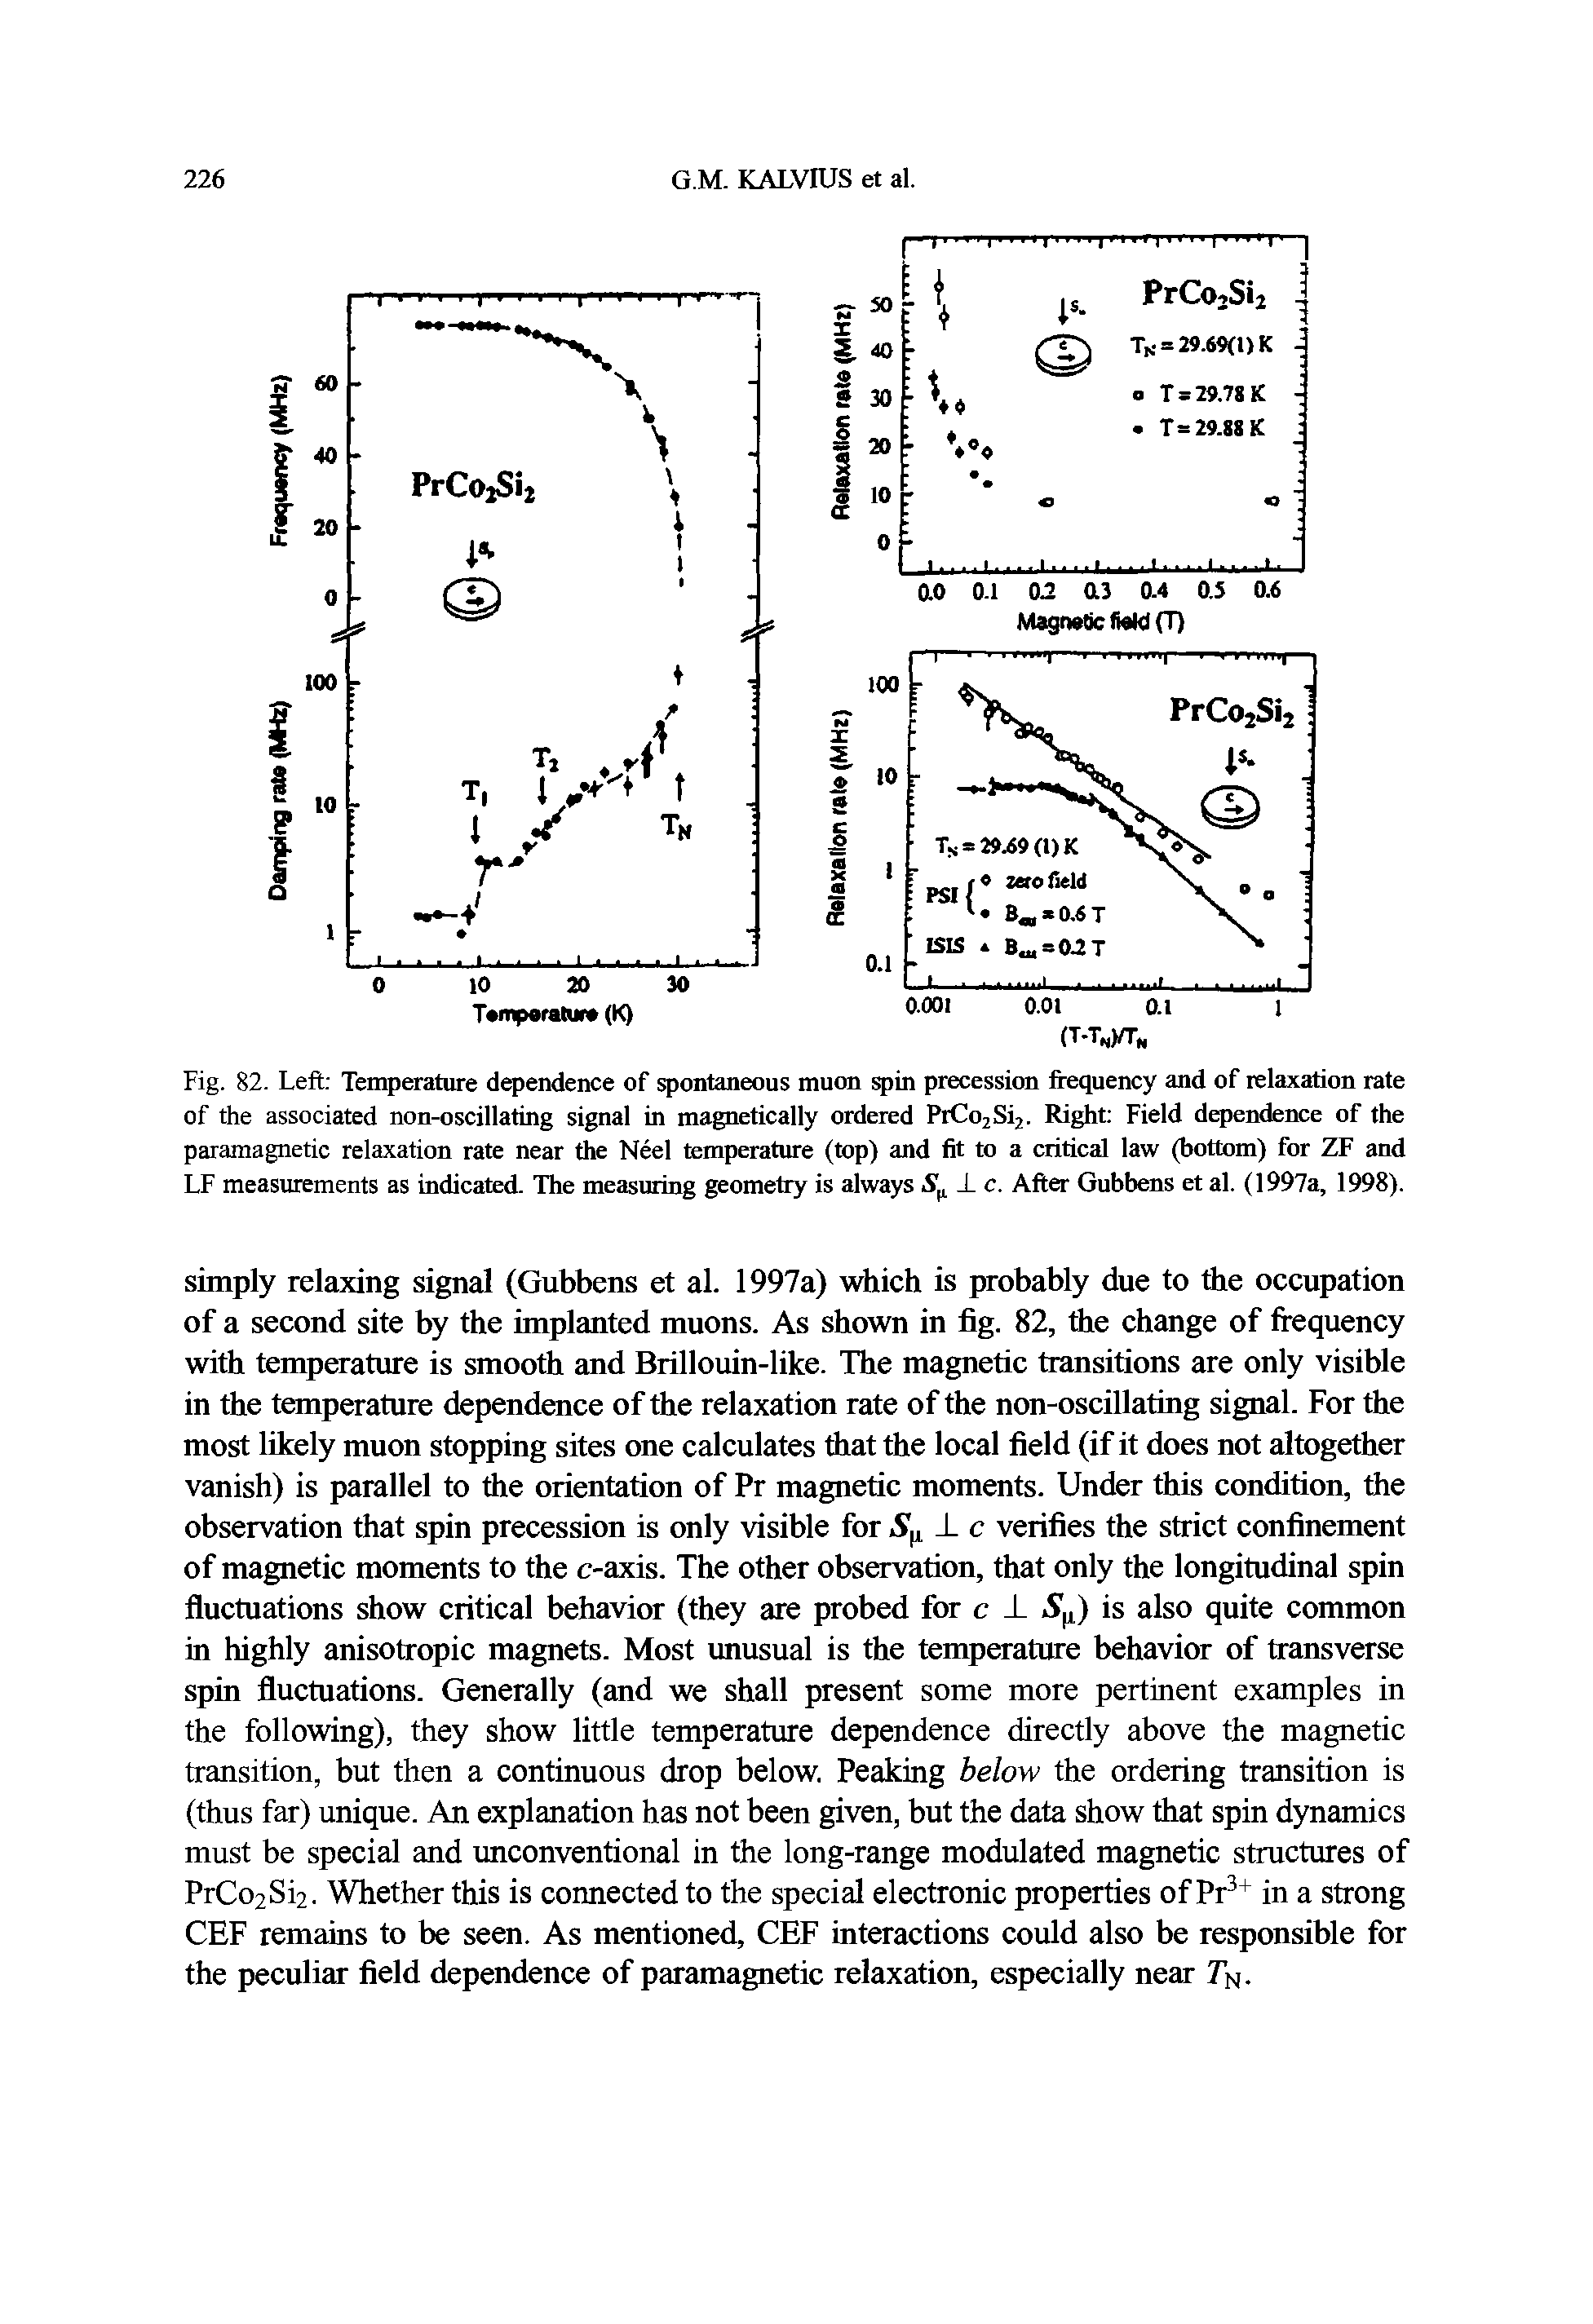 Fig. 82. Left Temperature dependence of spontaneous muon spin precession frequency and of relaxation rate of the associated non-oscillating signal in magnetically ordered PrCojSij. Right Field dependence of the paramagnetic relaxation rate near the Neel temperature (top) and fit to a critical law (bottom) for ZF and LF measurements as indicated. The measuring geometry is always c. After Gubbens et al. (1997a, 1998).